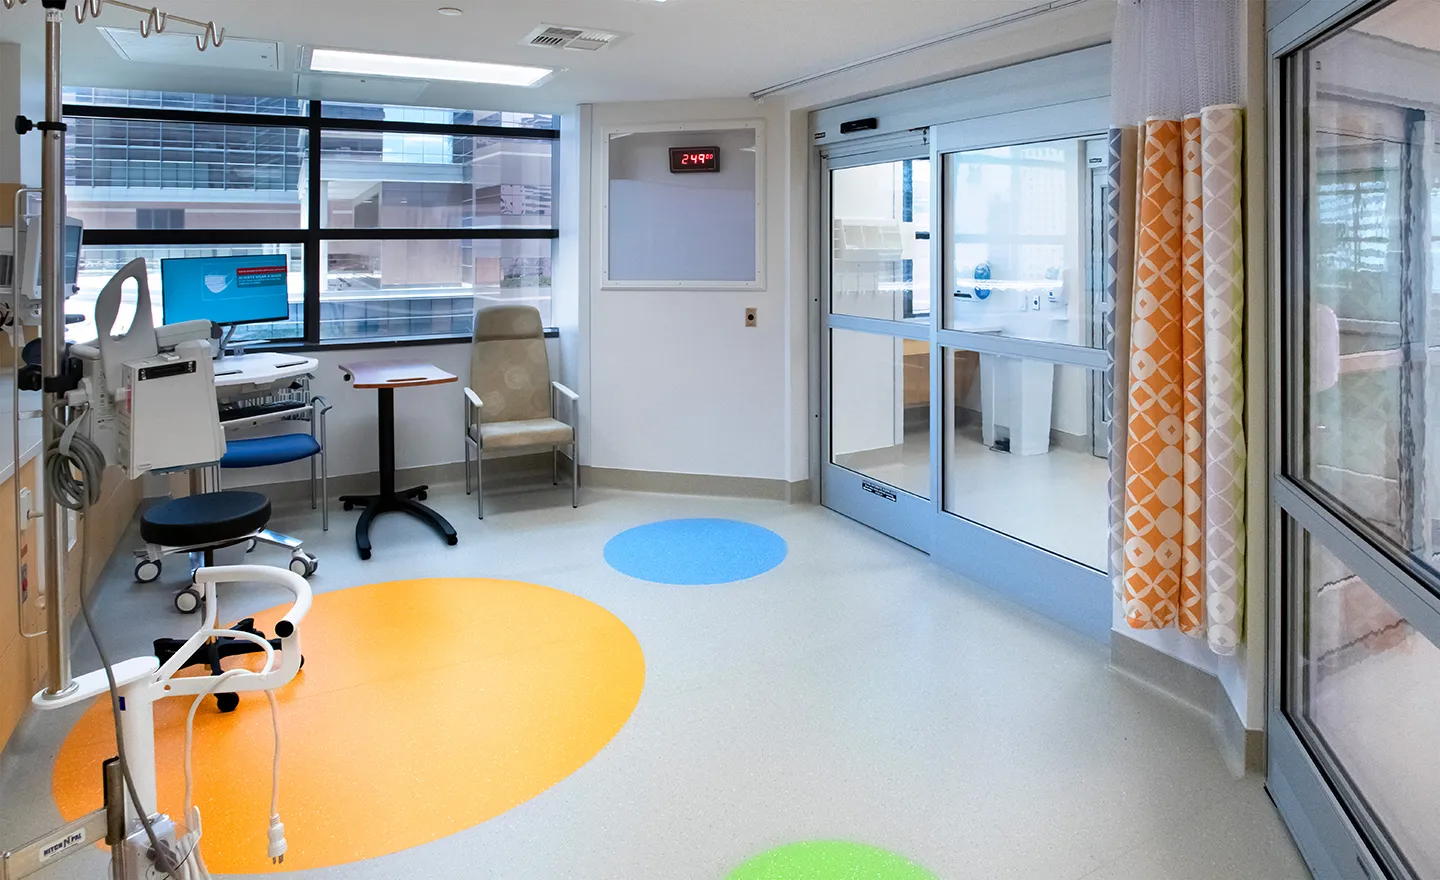 Isolated treatment rooms provide additional space for higher-acuity patients.